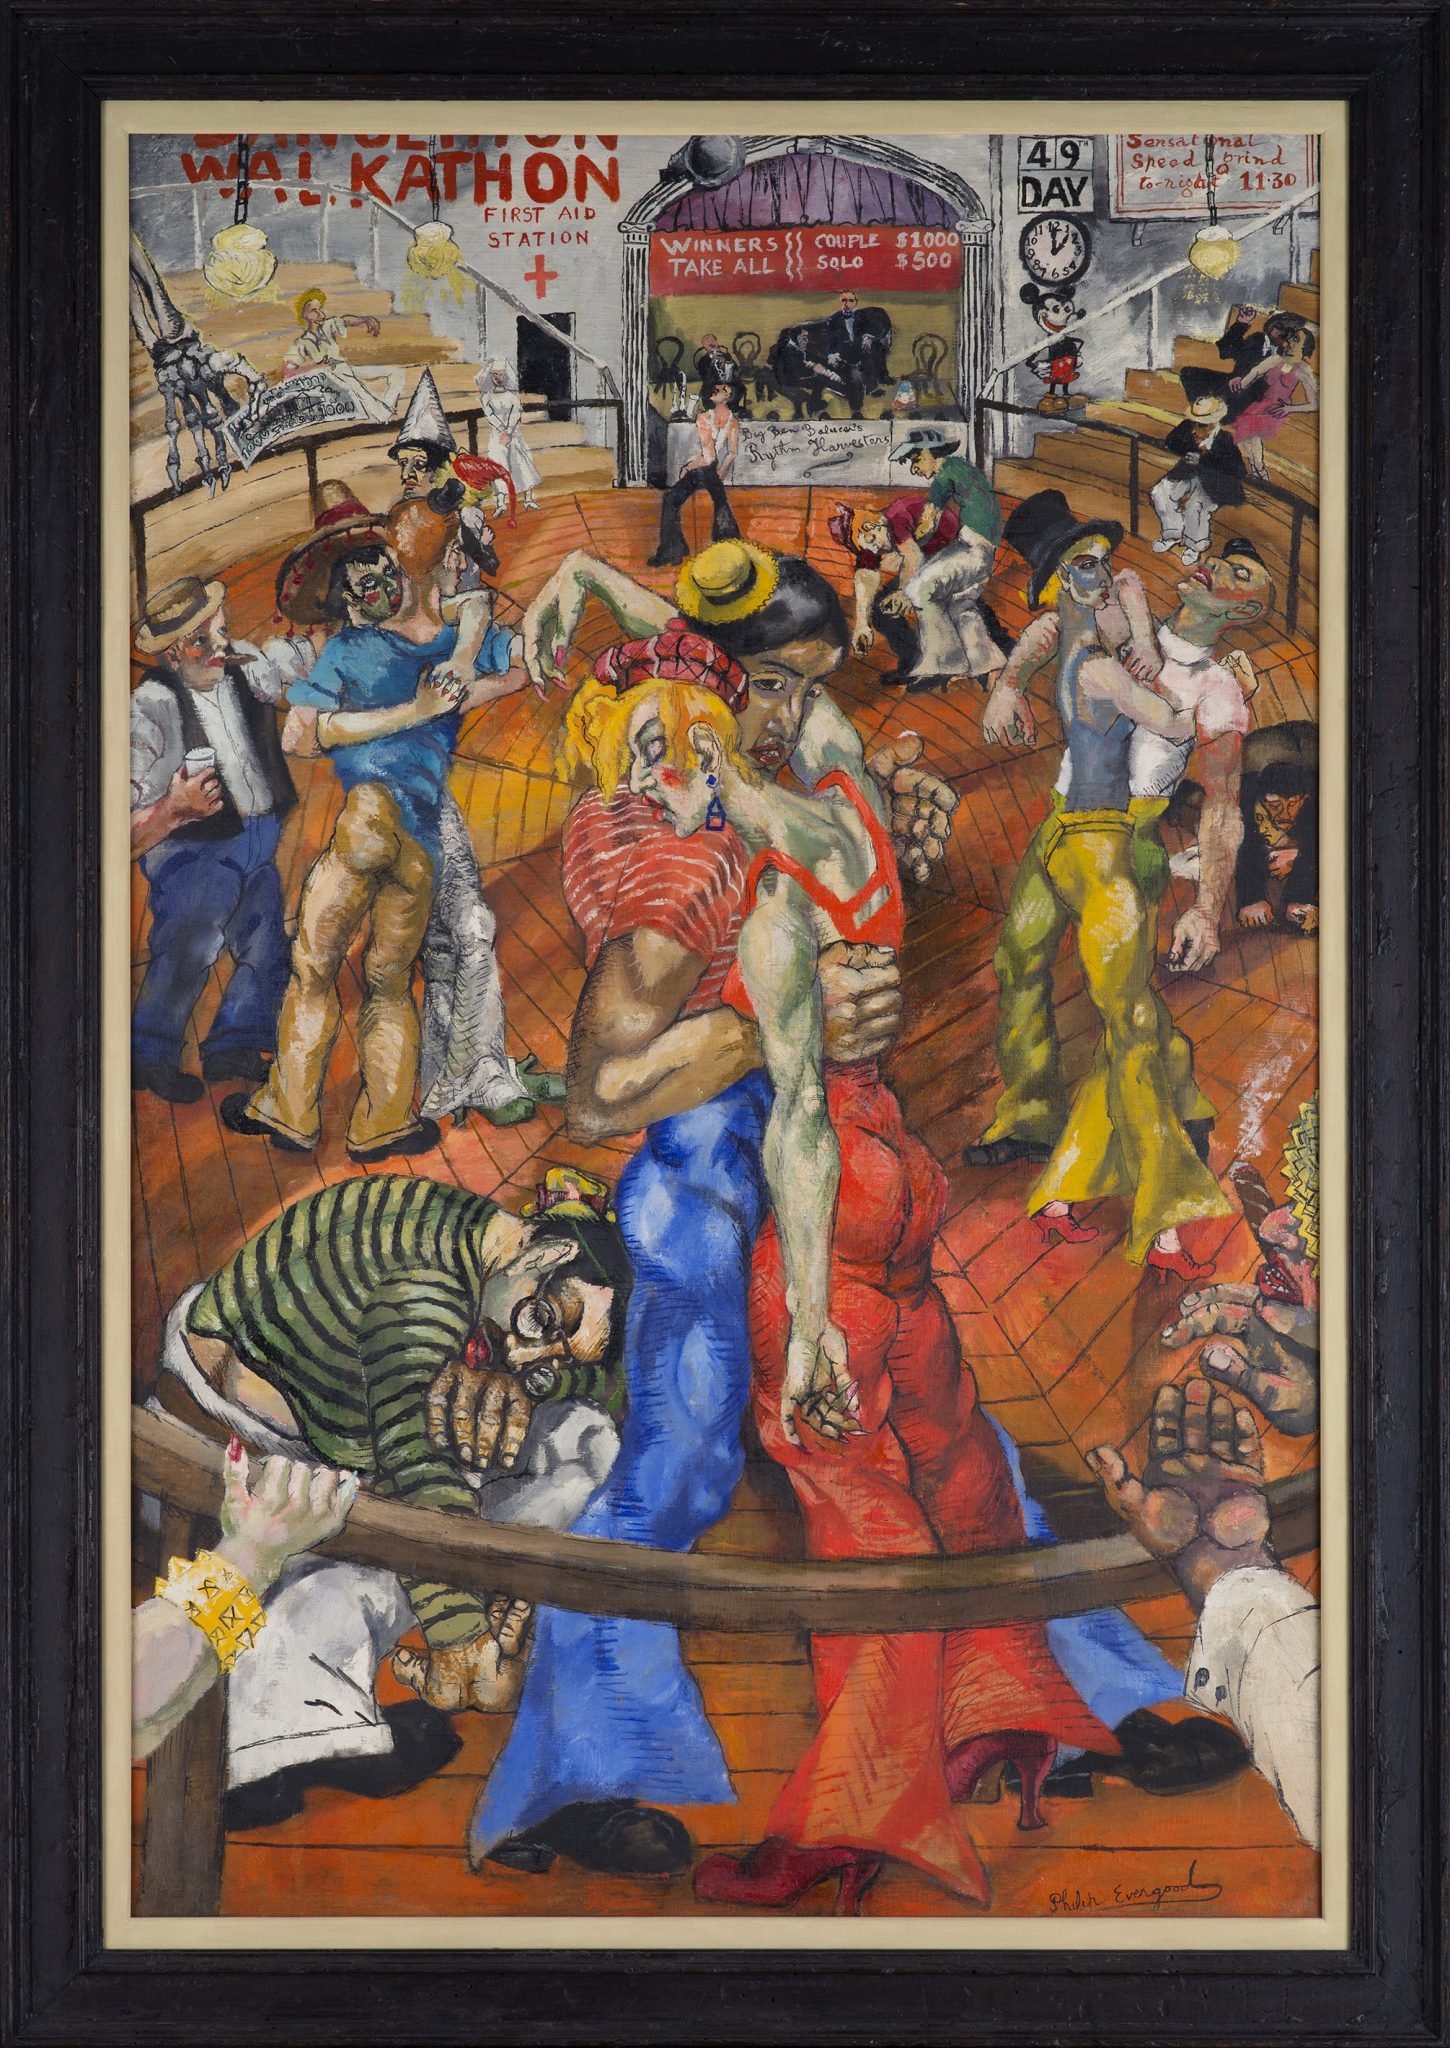 A painting of a dance marathon, with several people dancing in pairs in a ring, falling asleep from being too tired